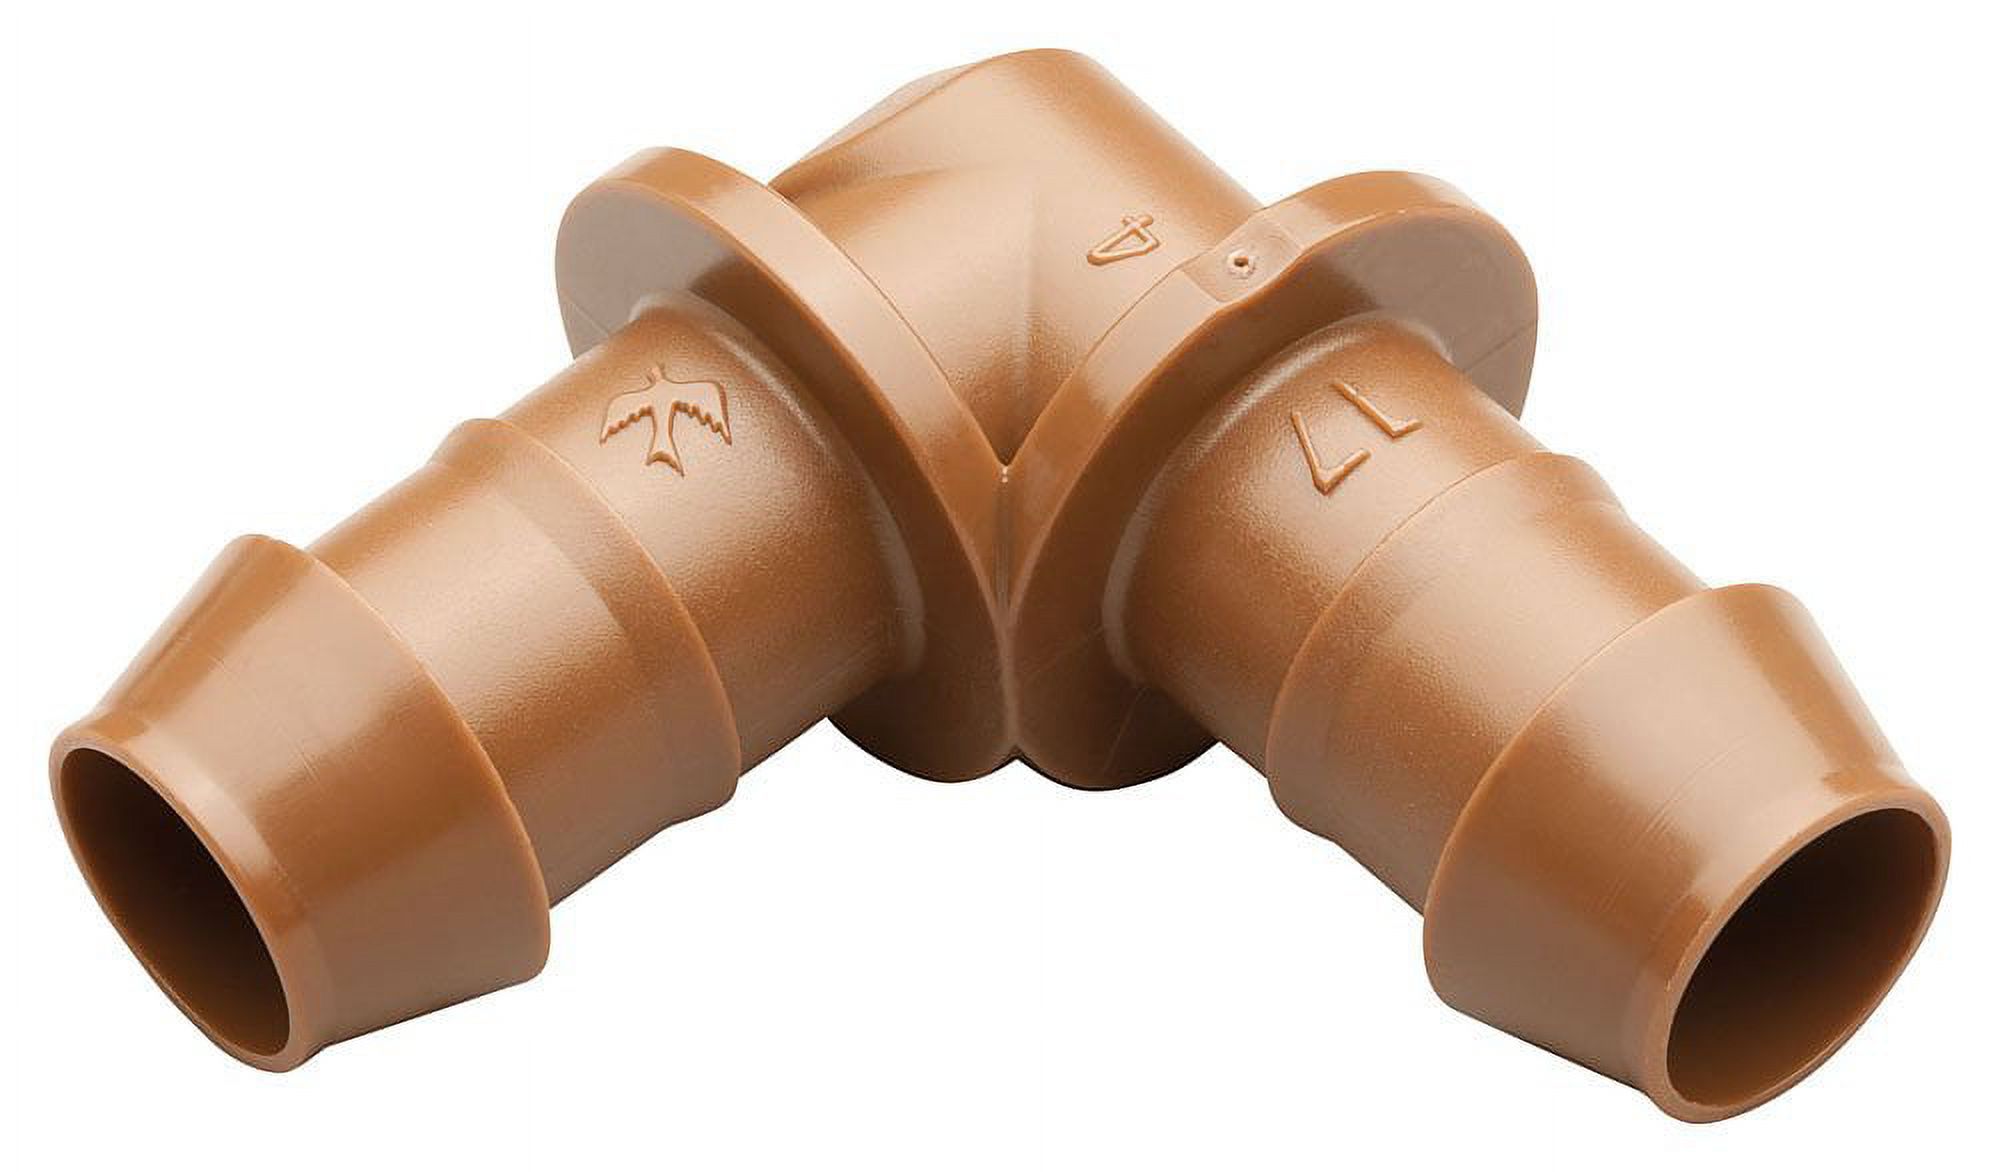 Rain Bird BE50/4PK Drip Irrigation Universal Barbed Elbow Fitting, Fits All Sizes of 5/8", 1/2", .700" Drip Tubing,Tan, 4-Pack - image 2 of 4